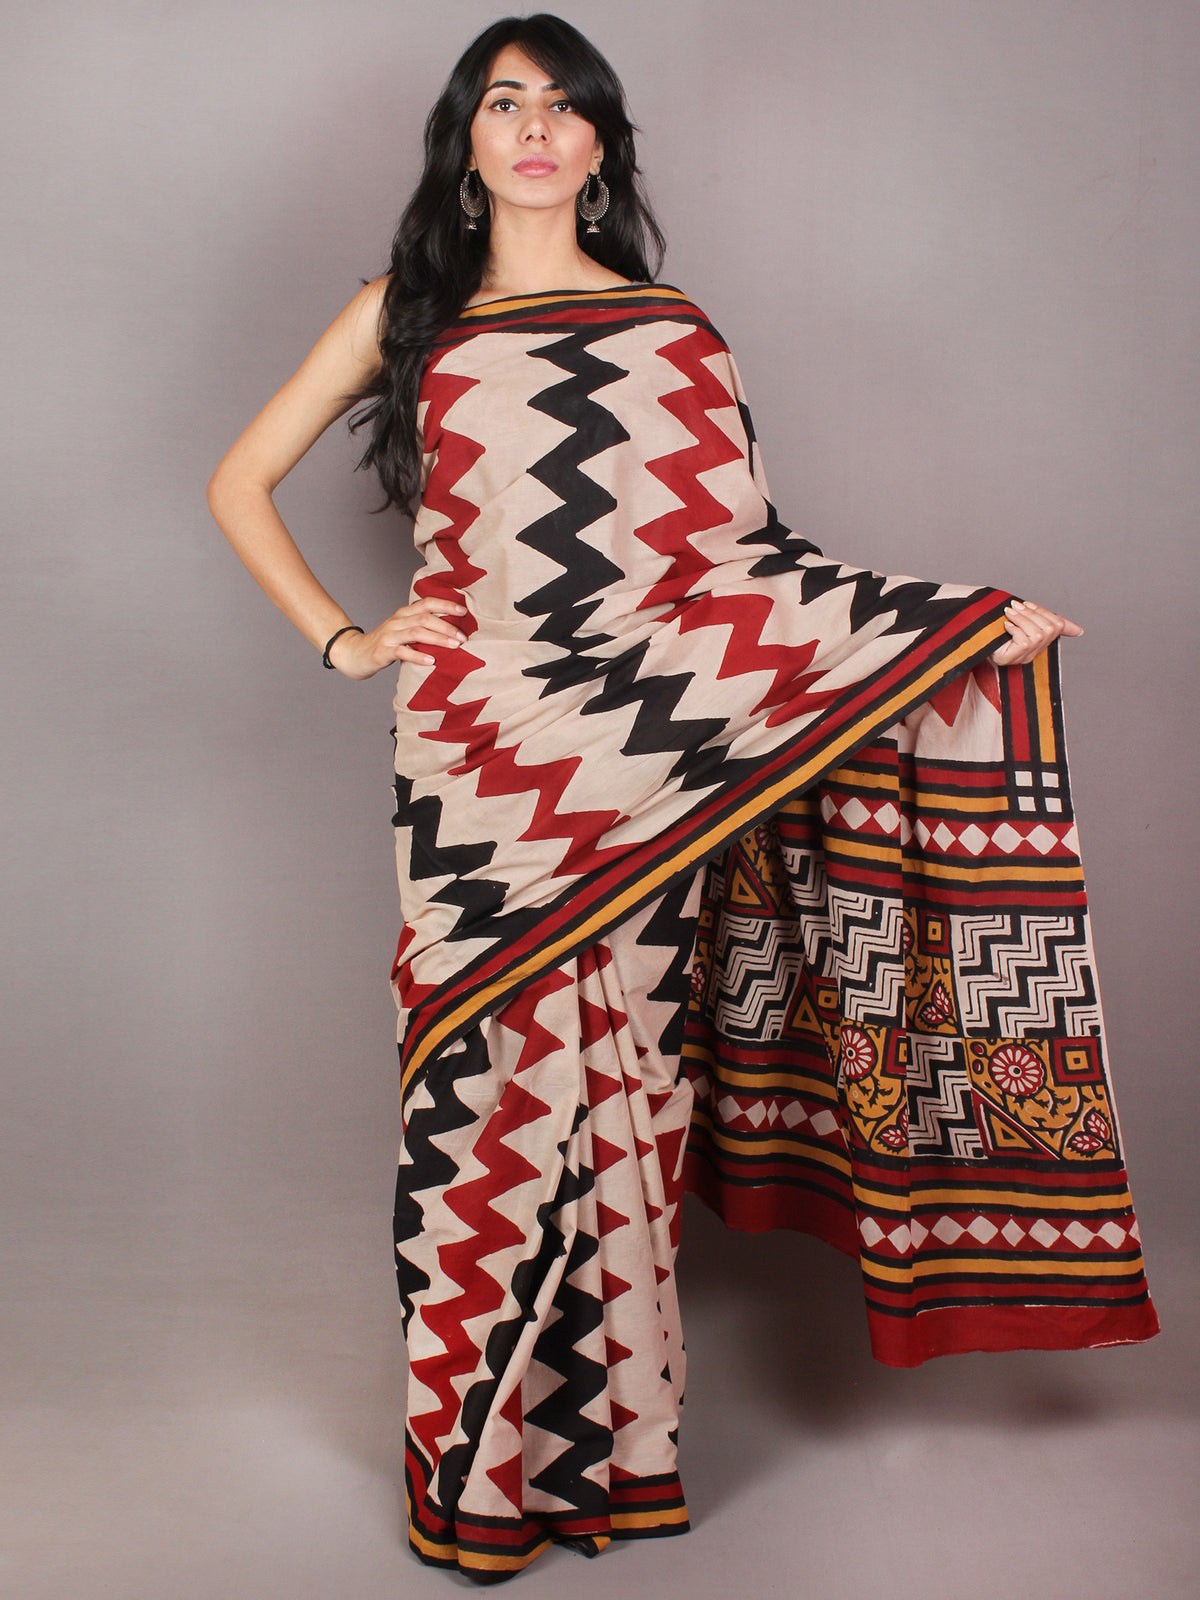 Red Black Beige Hand Block Printed in Natural Colors Cotton Mul Saree - S03170716